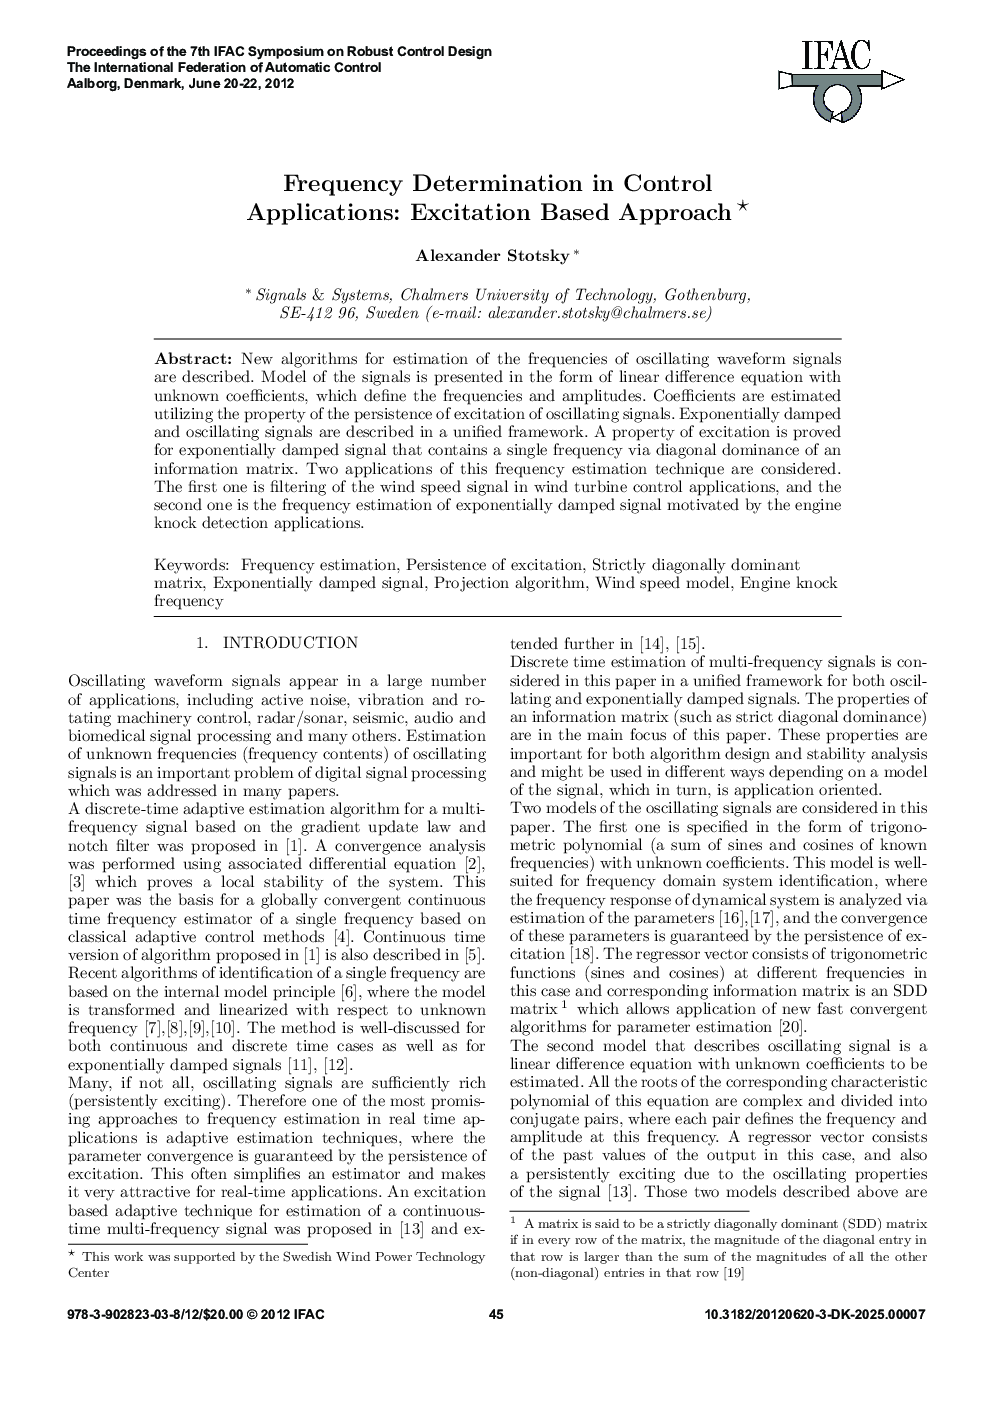 Frequency Determination in Control Applications: Excitation Based Approach 